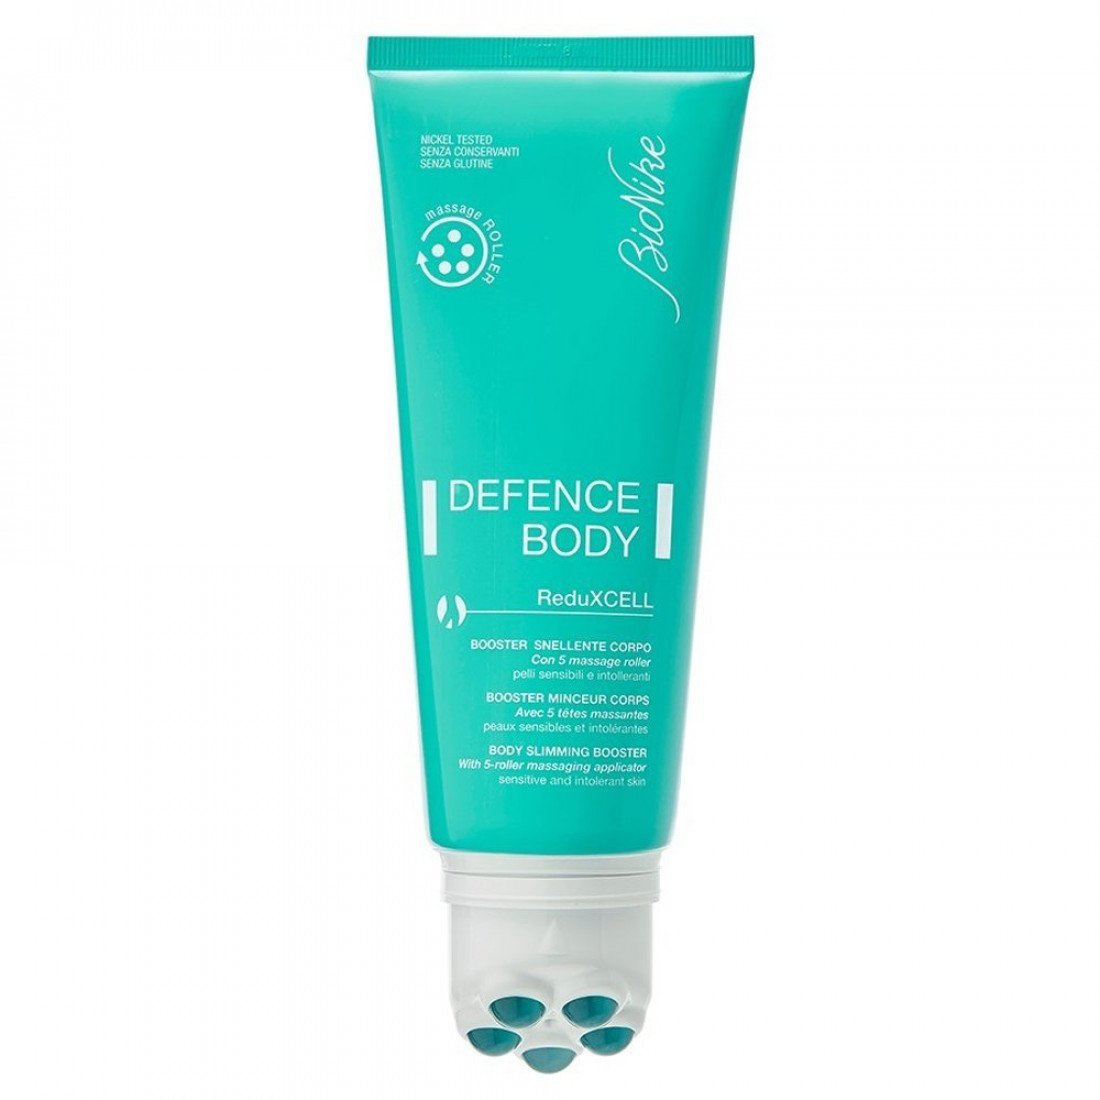 Bionike Defence Body Reduxcell